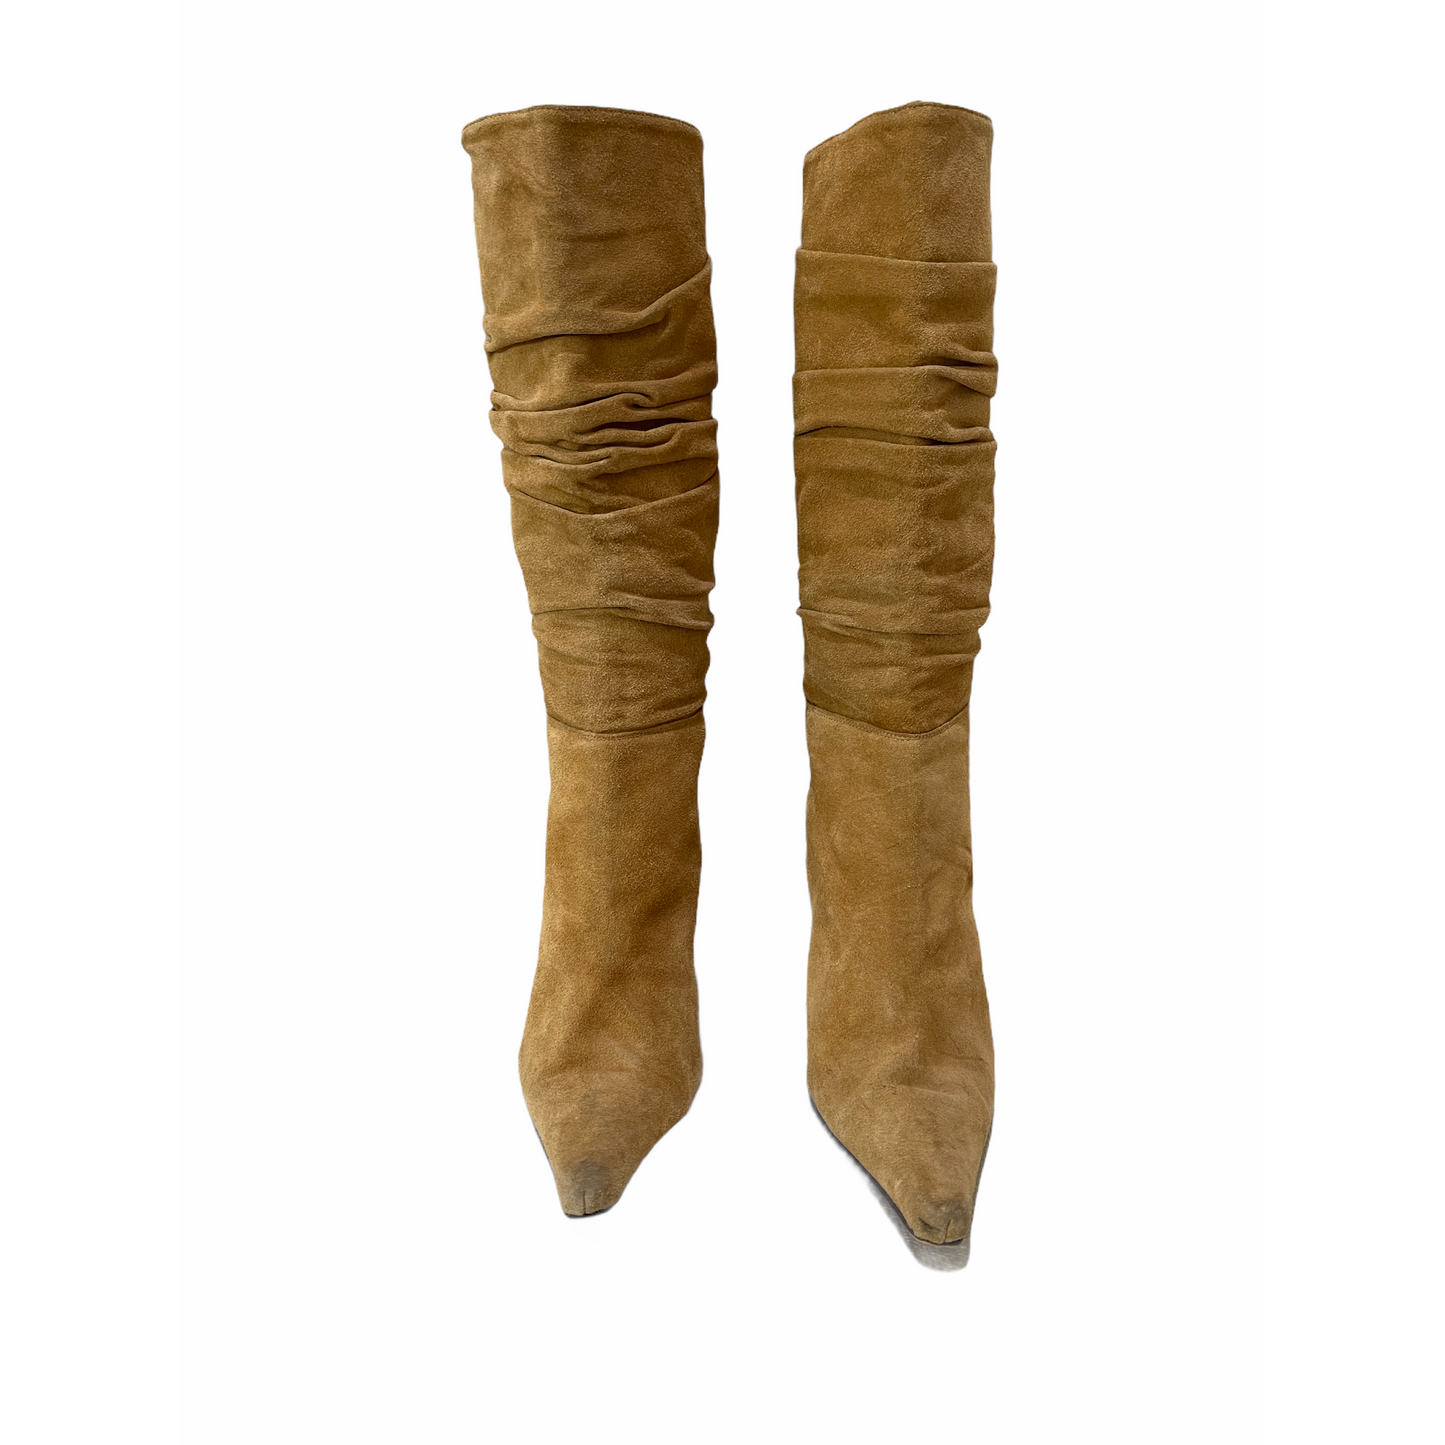 Heeled Boots-Knee High Style-Tan/Suede Material-By Charles David